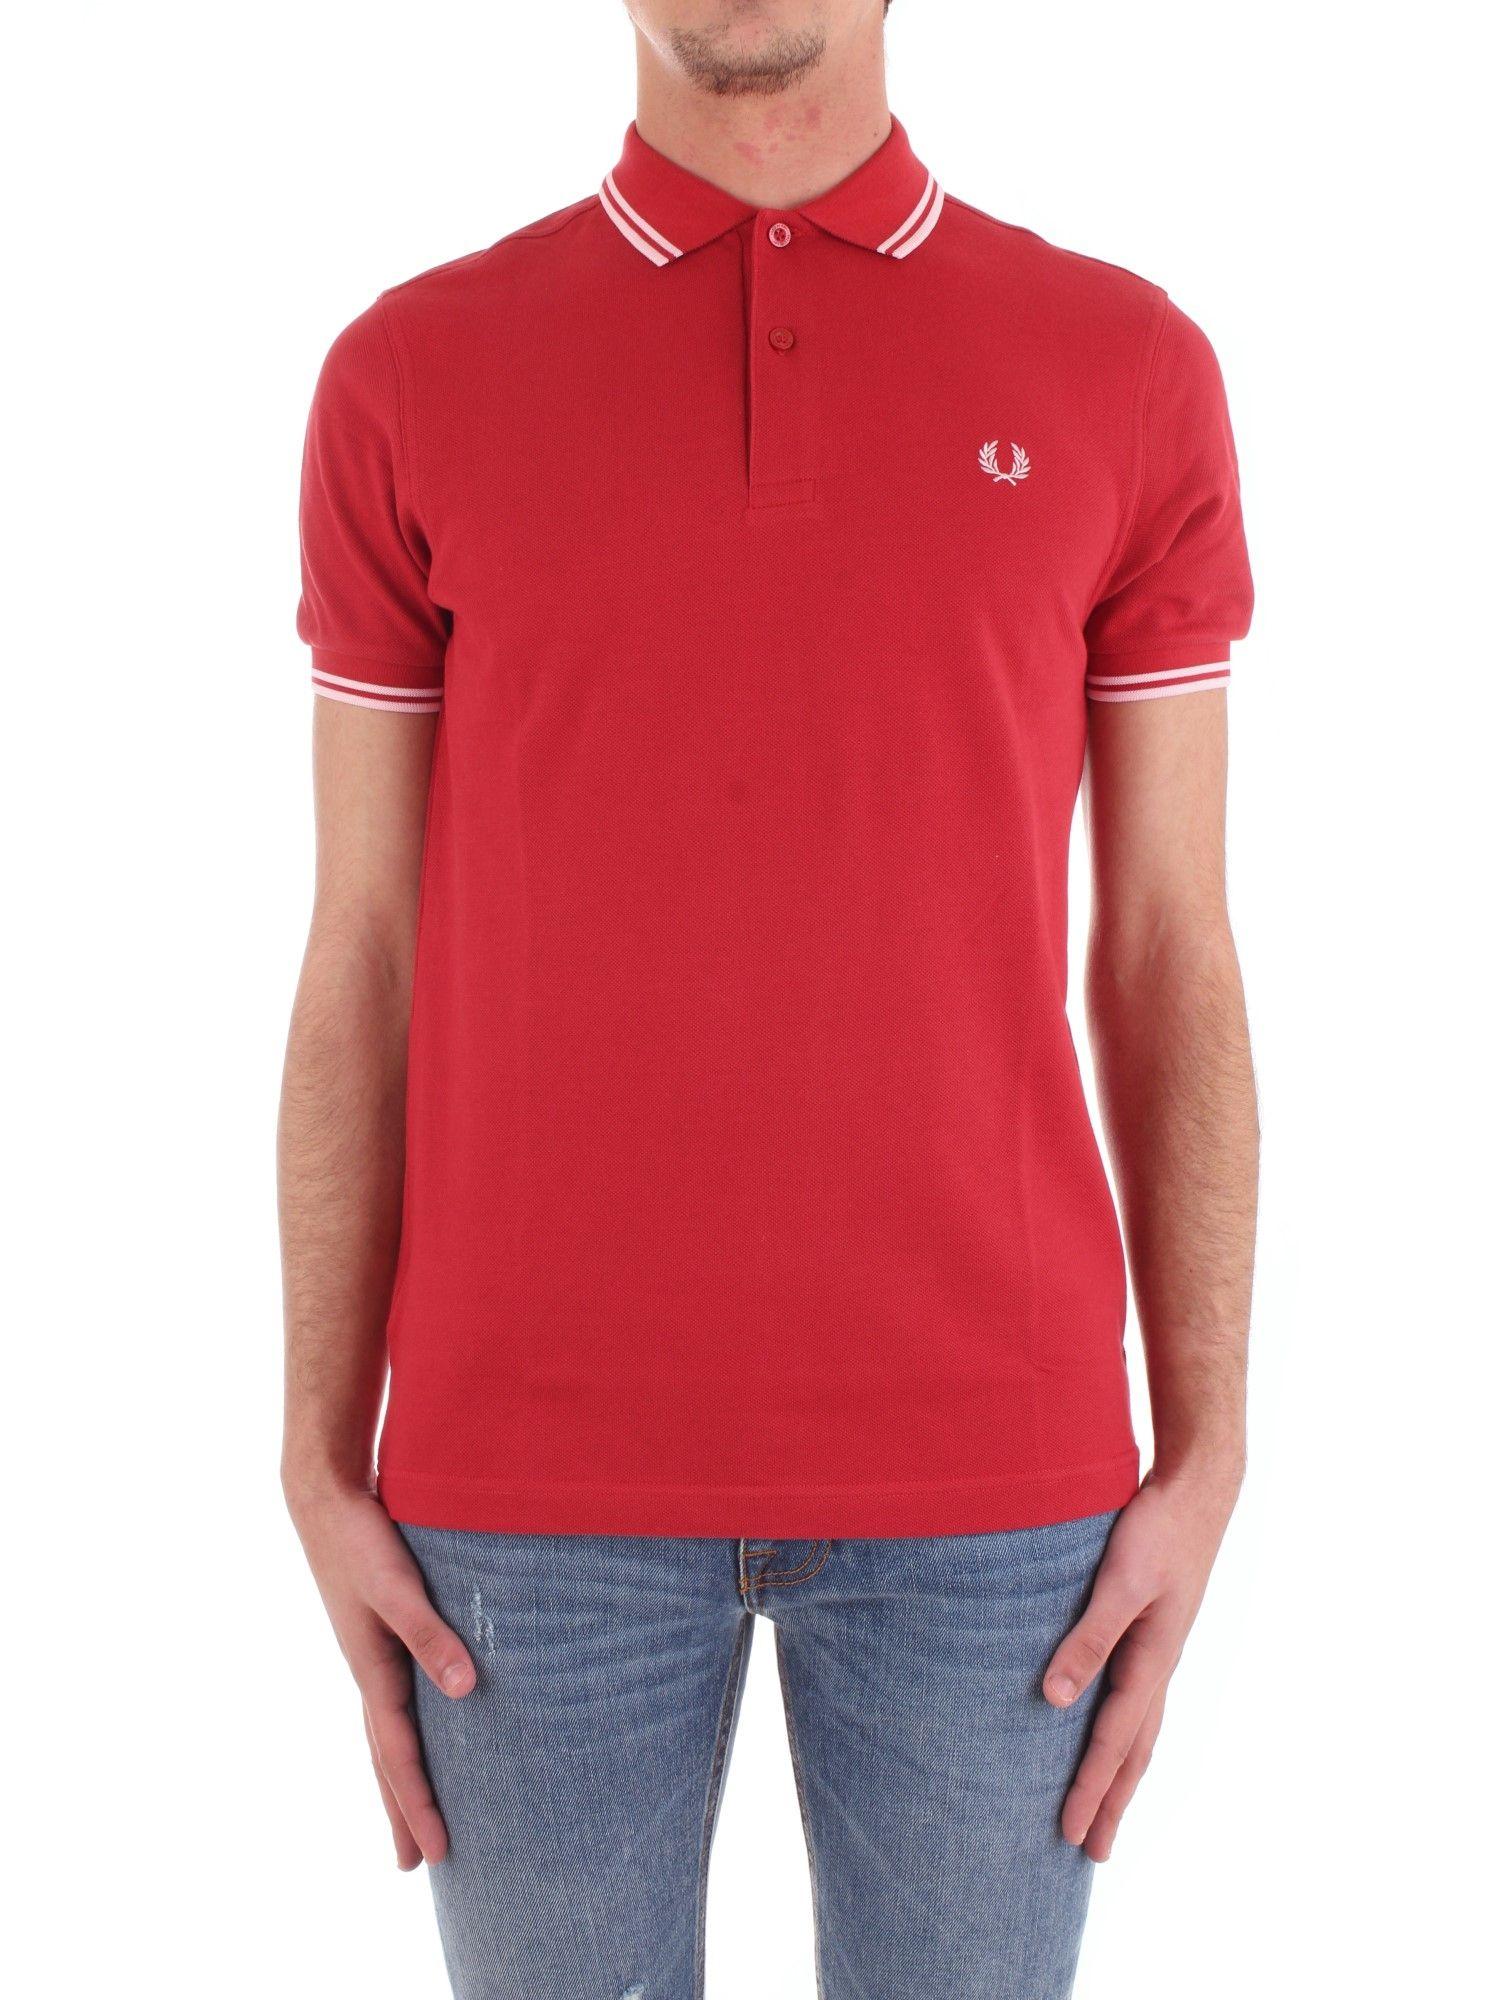 Fred Perry Red Cotton Polo Shirt in Red for Men - Lyst